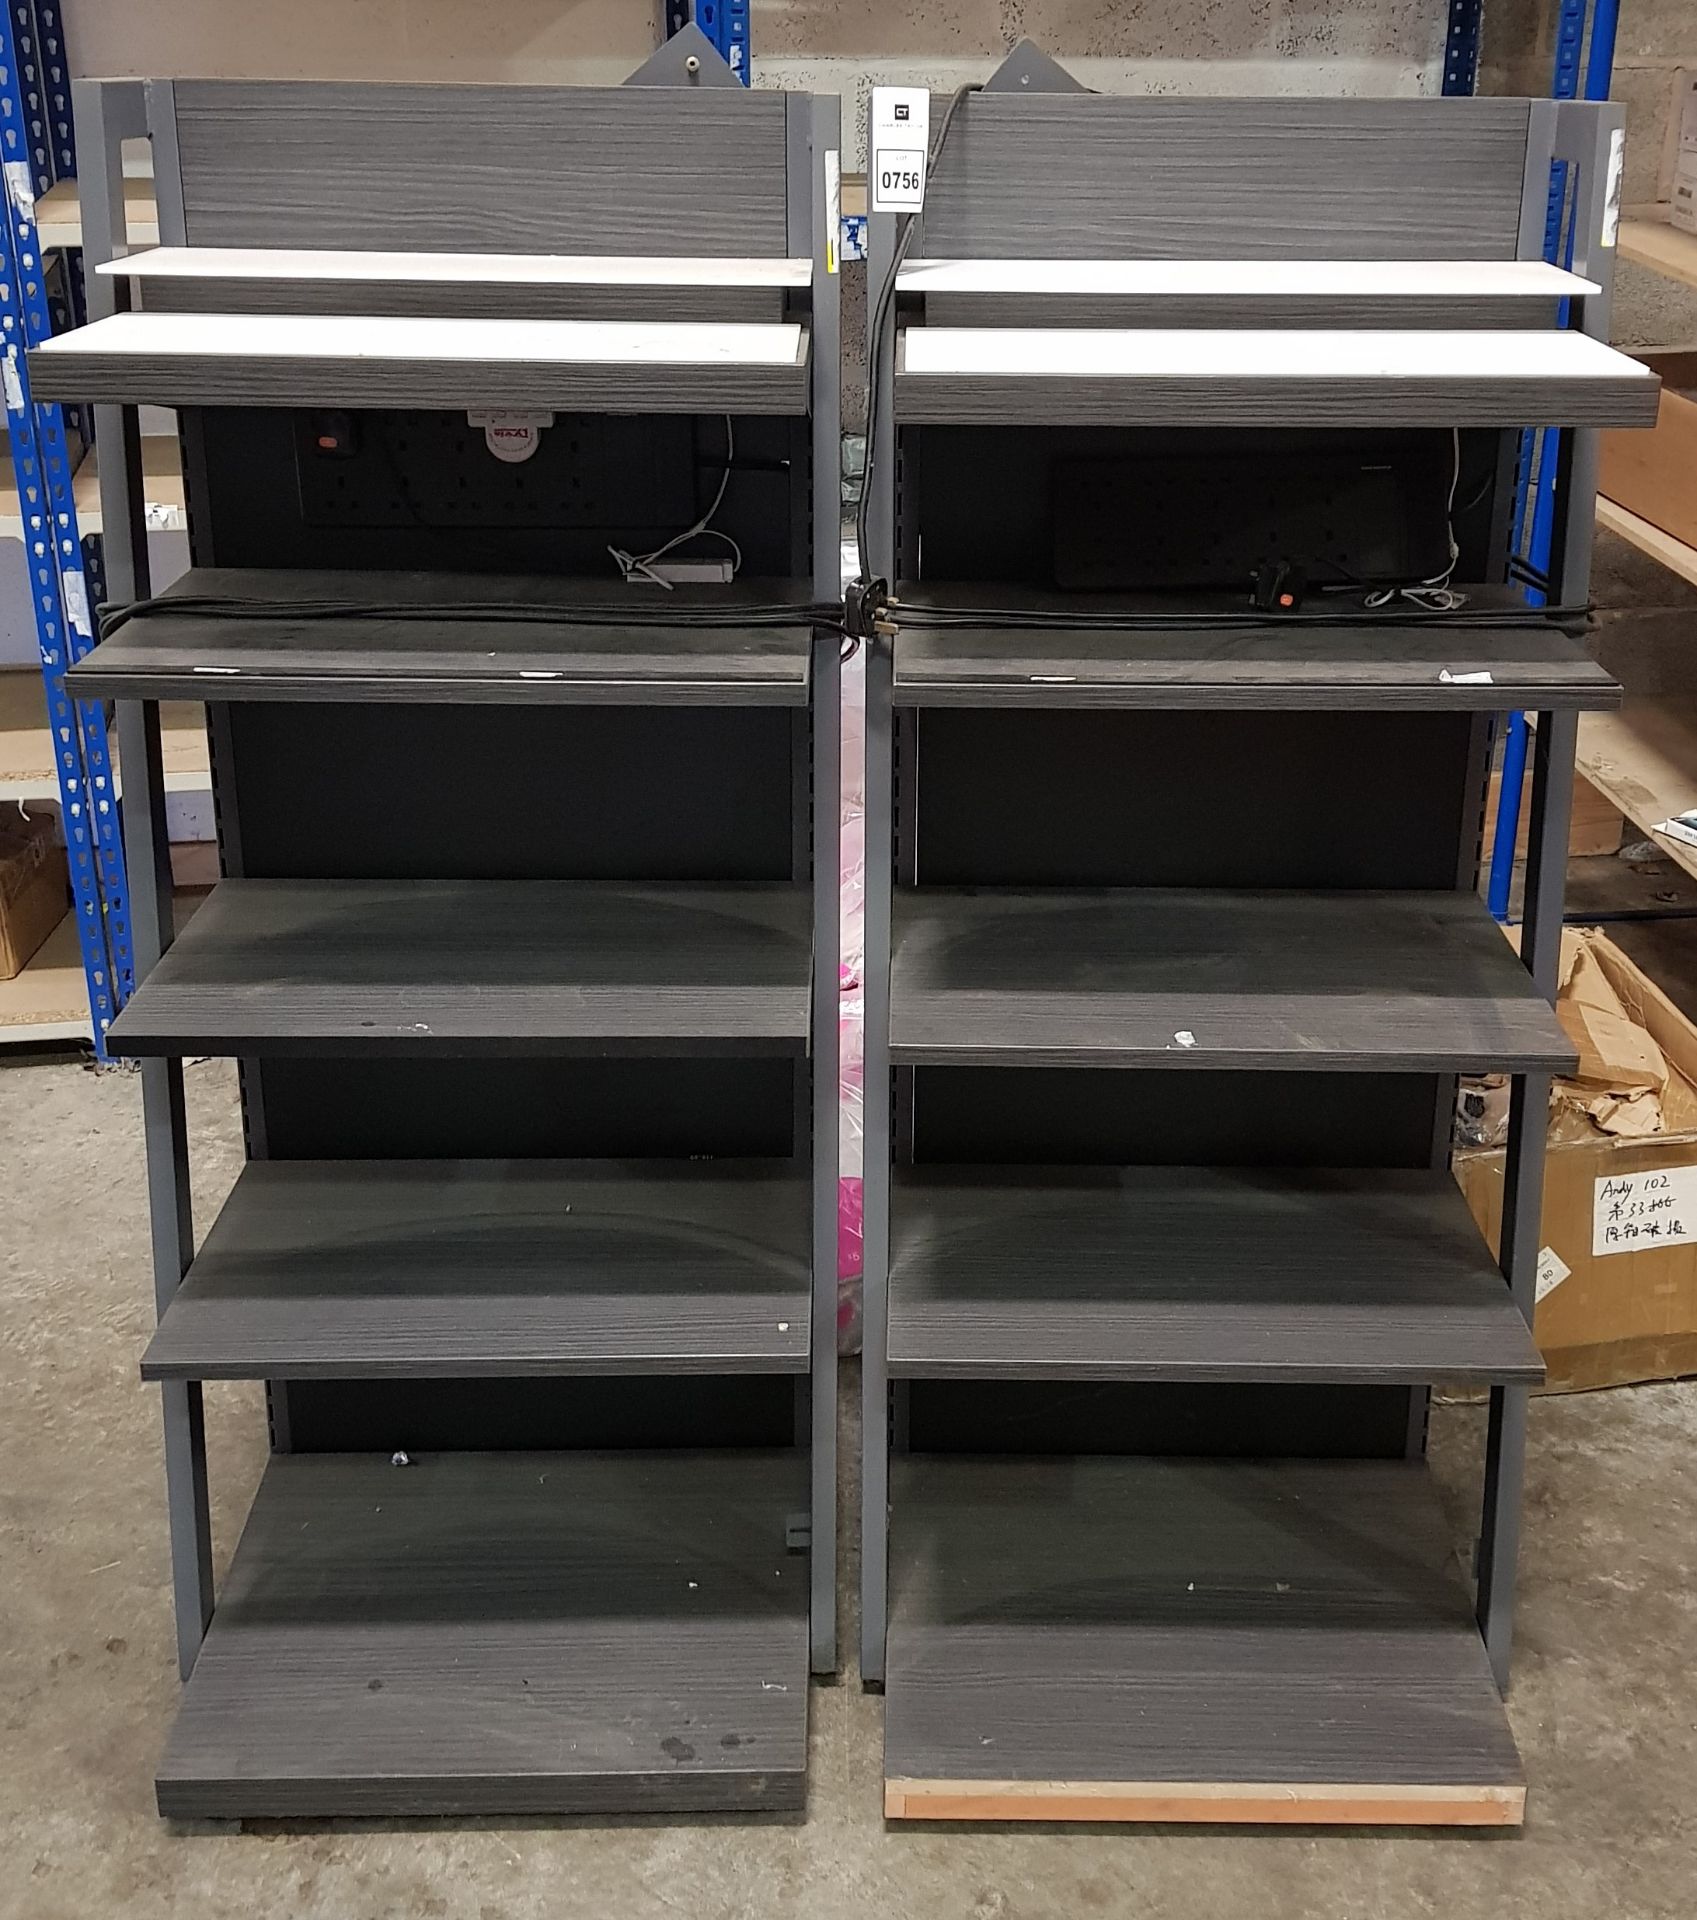 2 X 6 SHELF STORAGE UNITS IN GREY WITH LED LIGHTS - WITH BUILT IN 10 GANG EXTENSION SOCKETS -